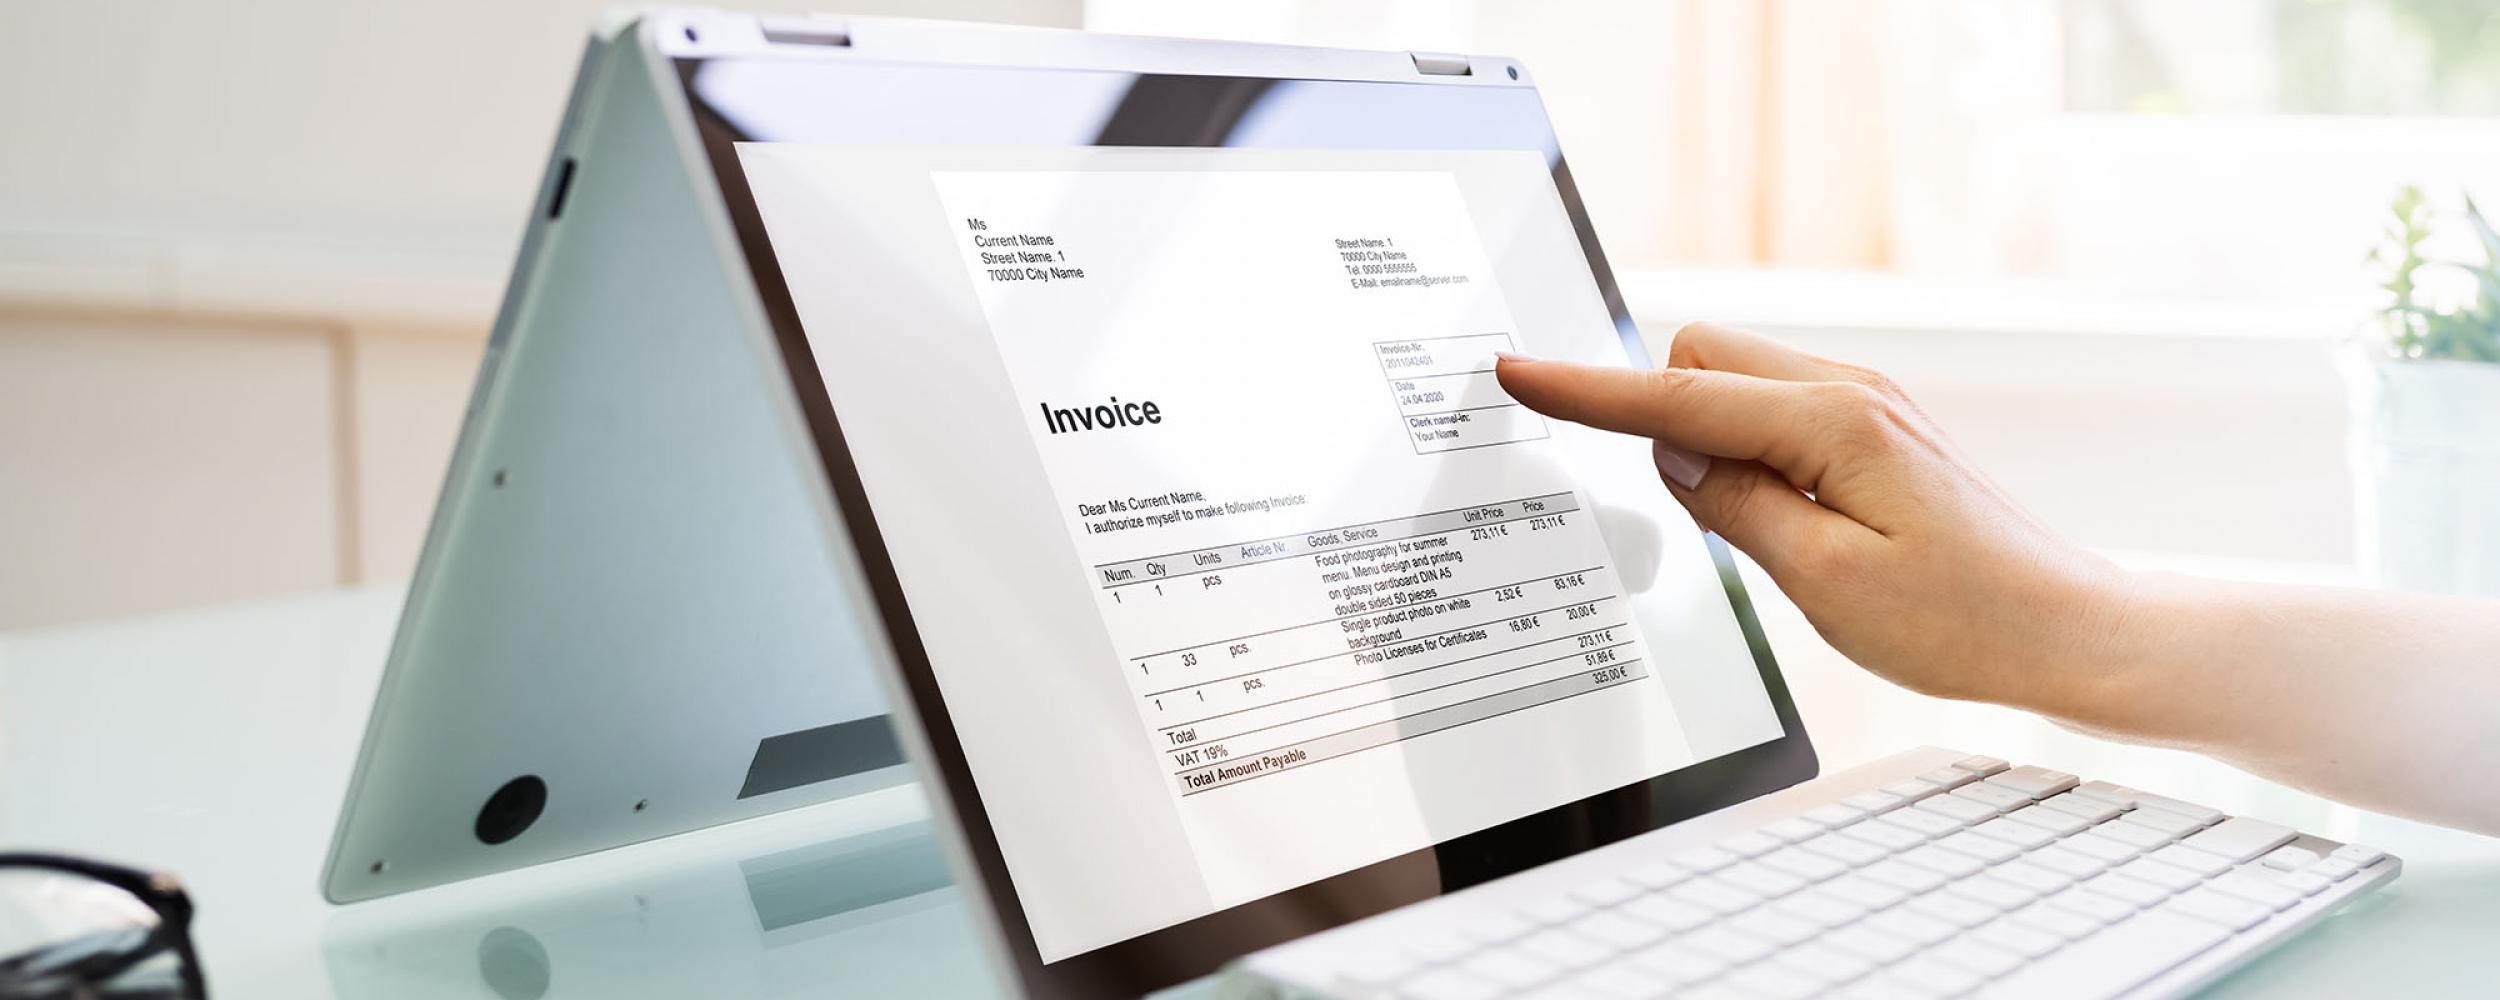 An invoice is displayed on the laptop